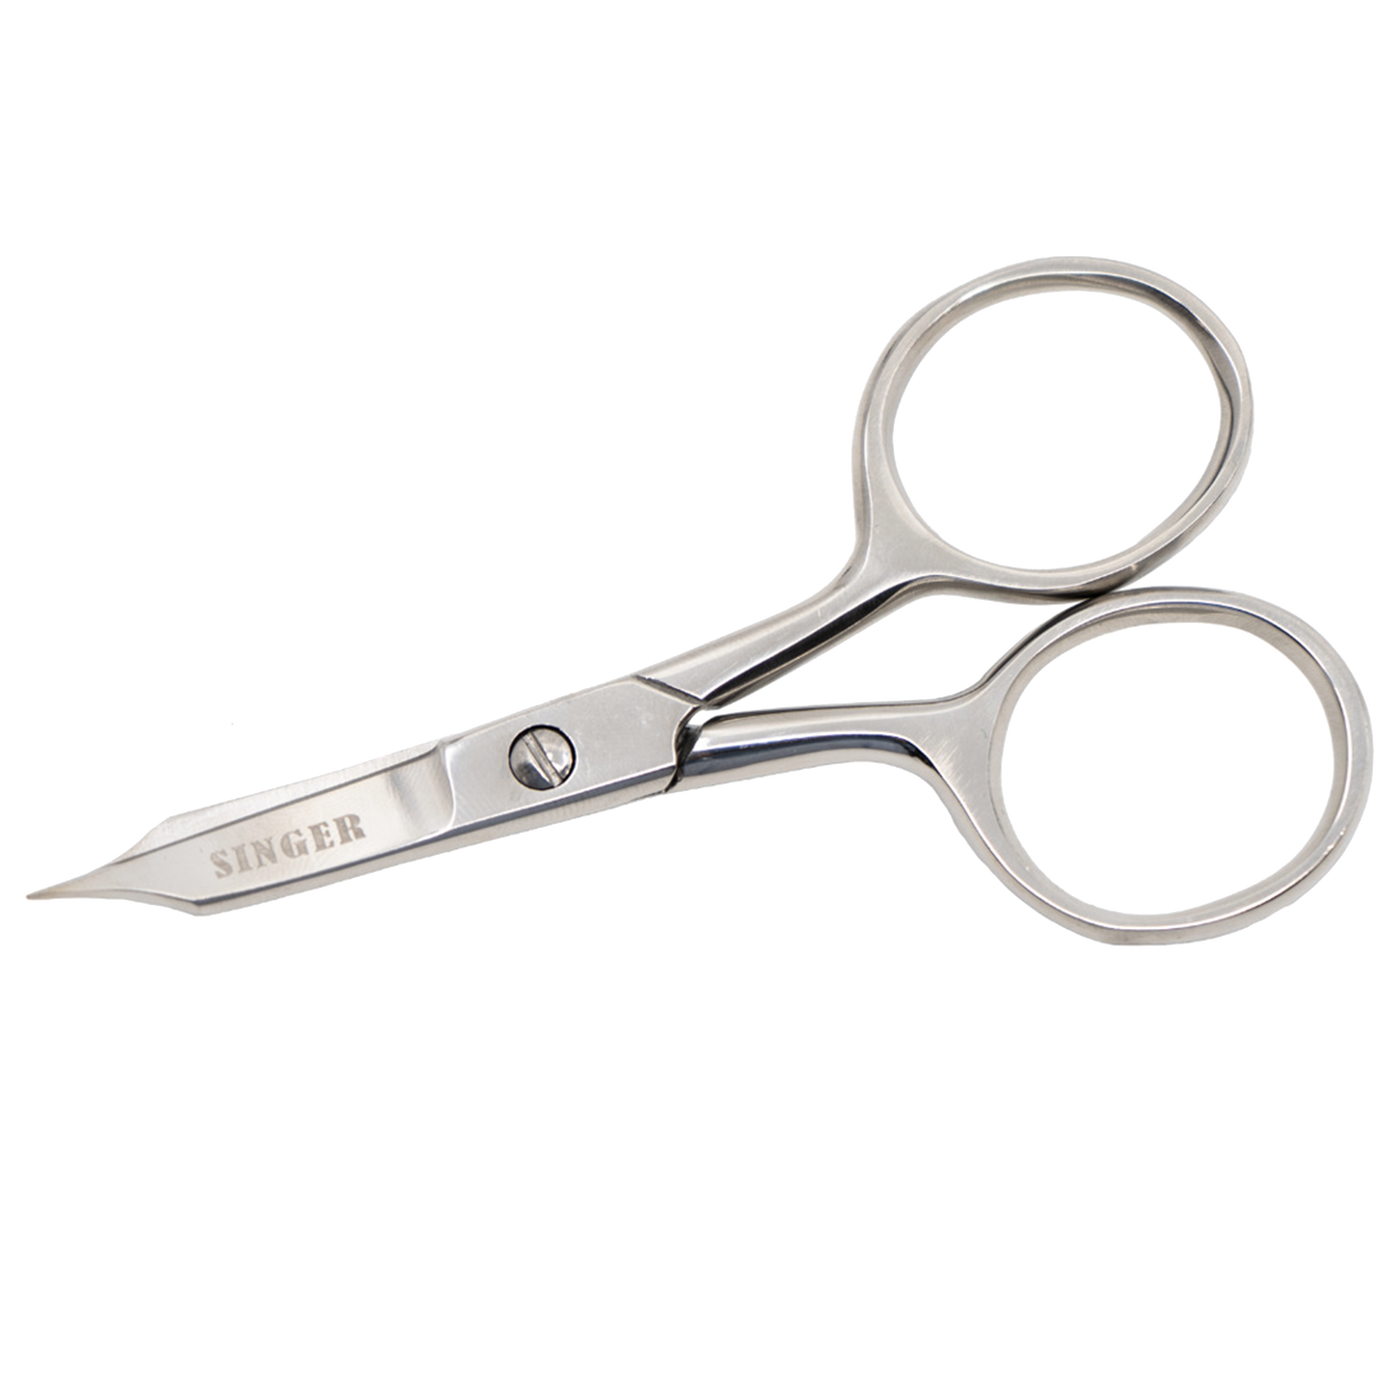 Singer Forged Curved Embroidery Scissors 4 Titanium Coated